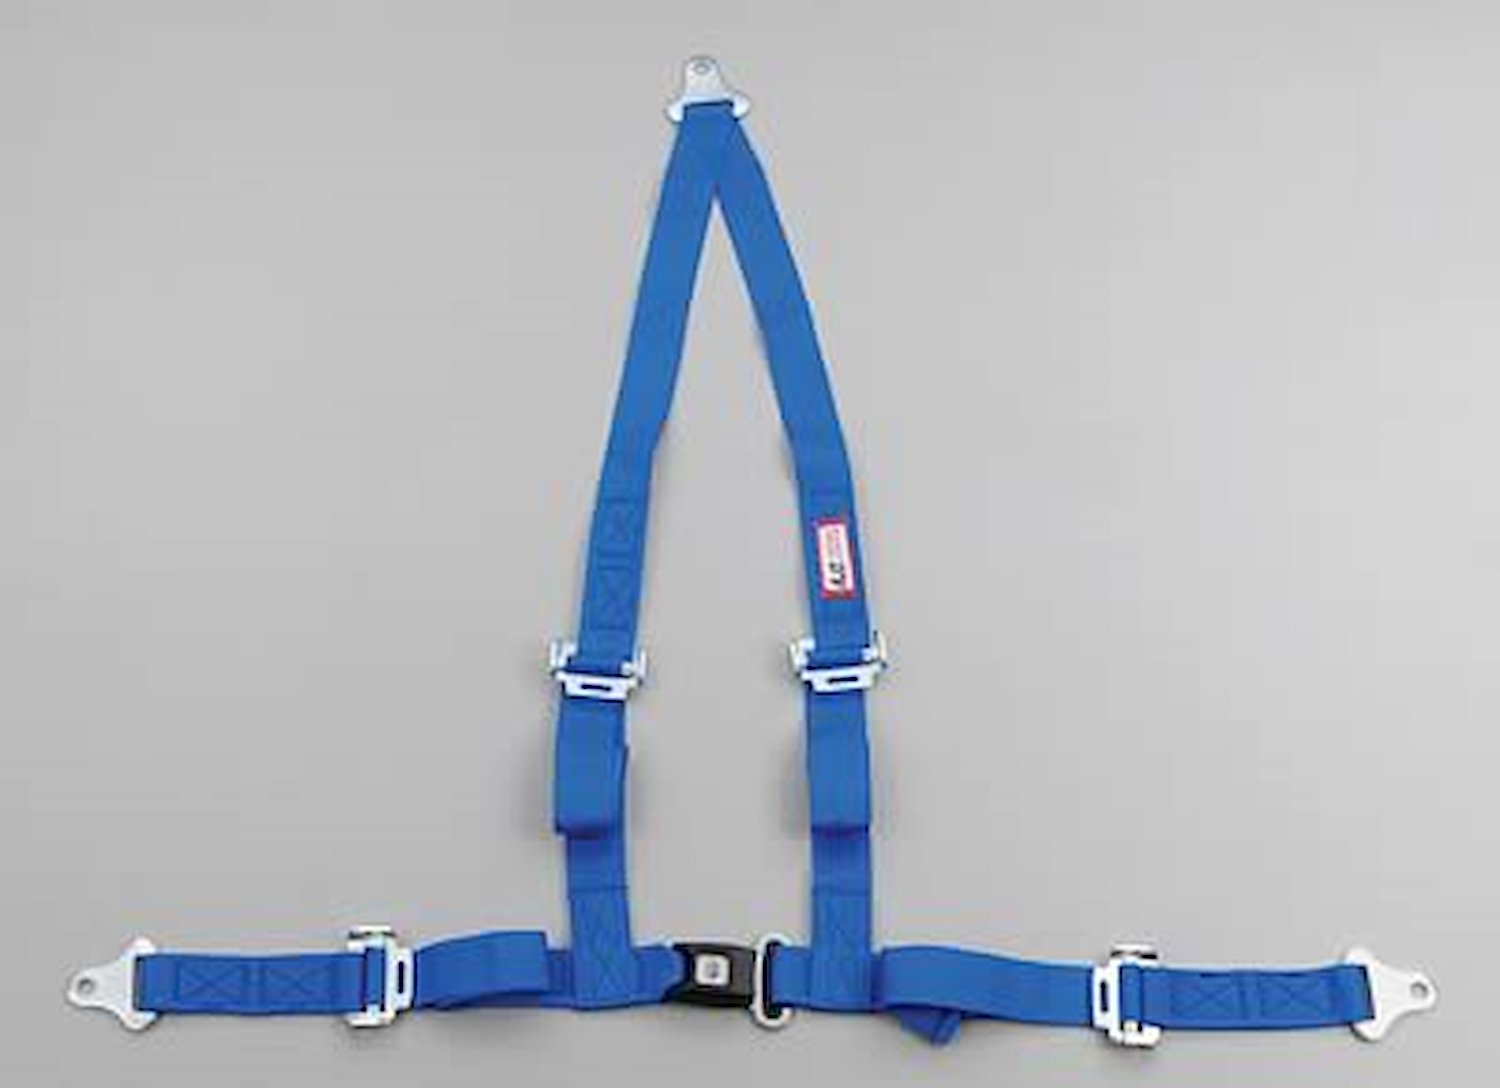 NON-SFI B&T HARNESS 2 PULL UP Lap Belt SNAP 2 S. H. Individual ROLL BAR Mount WRAP/BOLT w/STERNUM STRAP BLUE